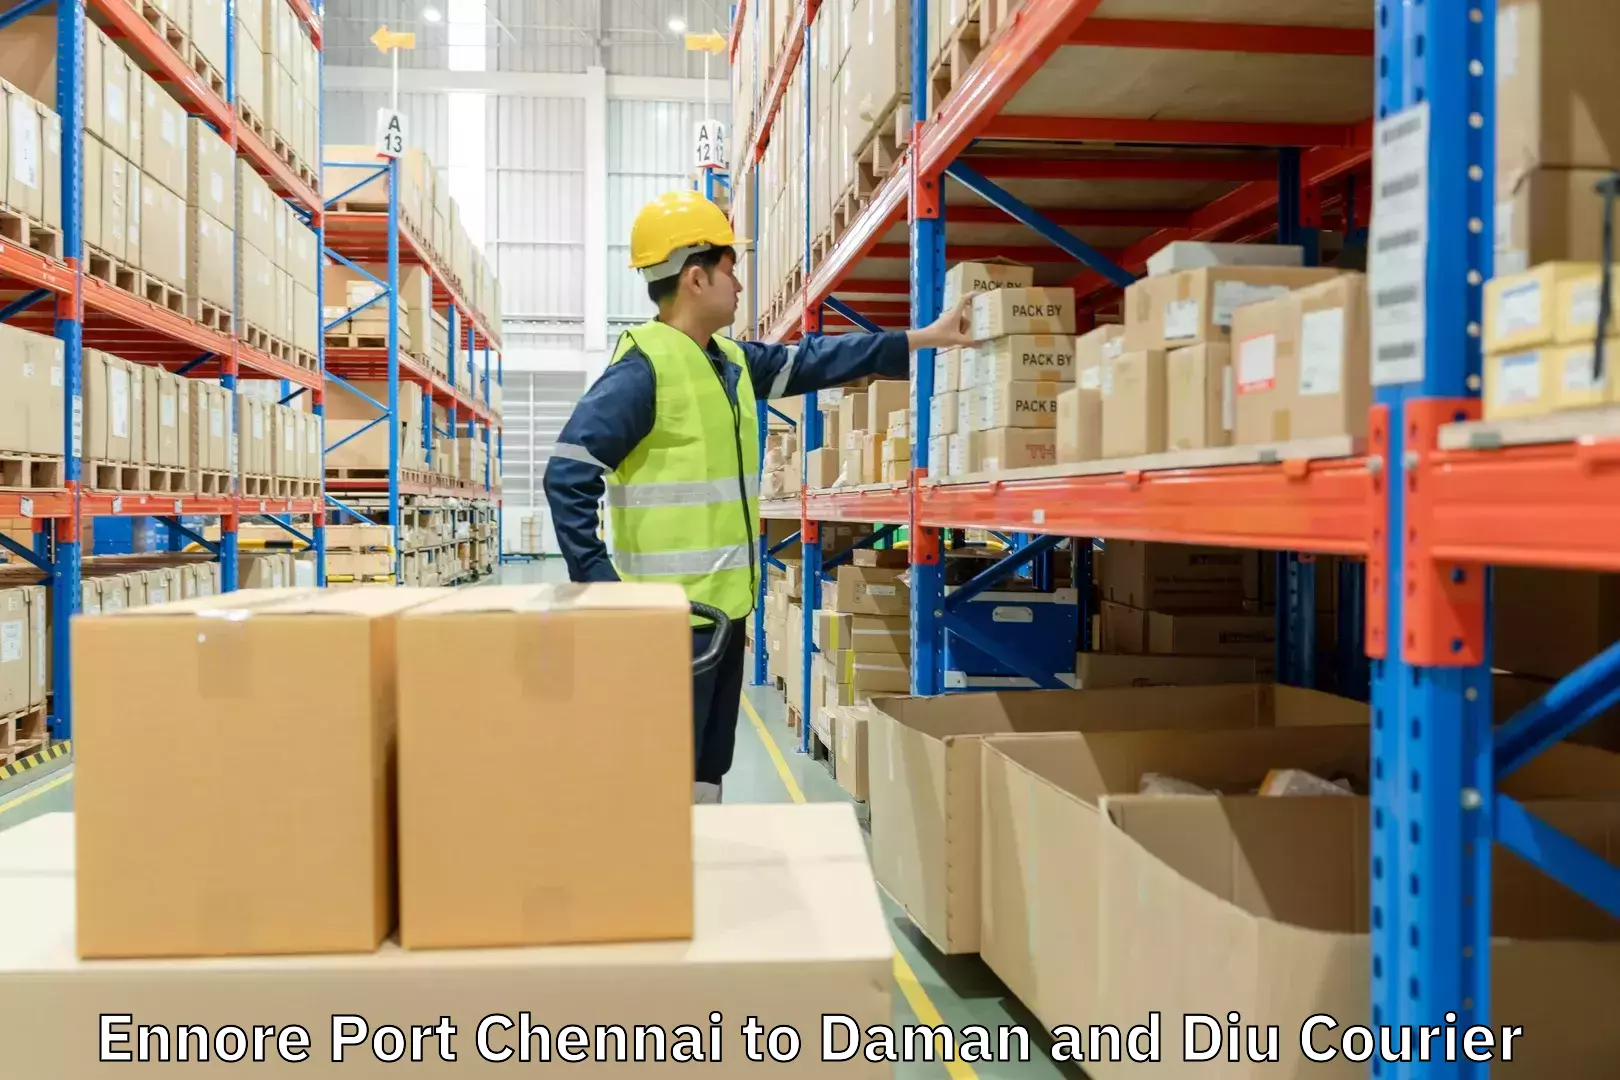 Pharmaceutical courier Ennore Port Chennai to Daman and Diu